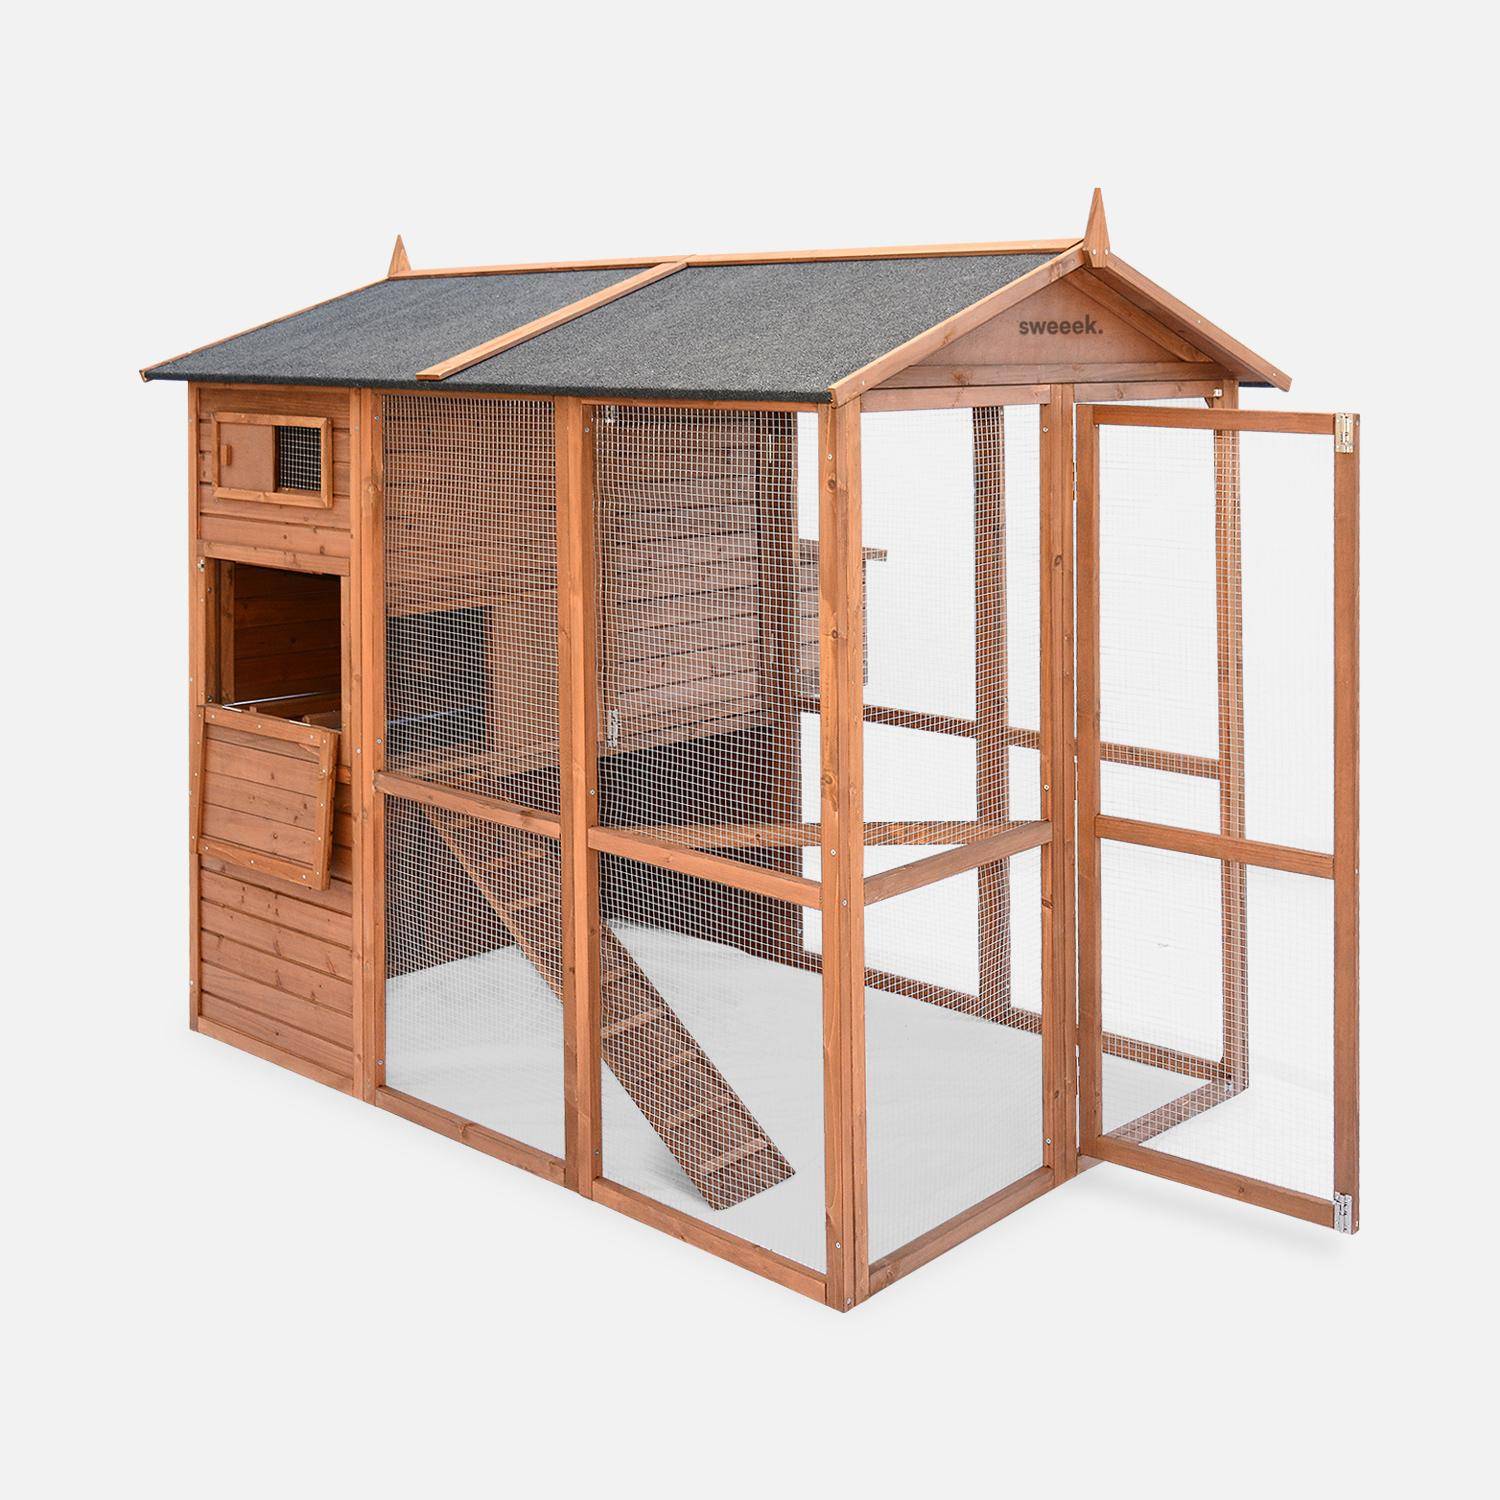 Wooden chicken coop - backyard hen cage for 6 to 8 chickens, indoor and outdoor space - Cotentine - Wood colour,sweeek,Photo5